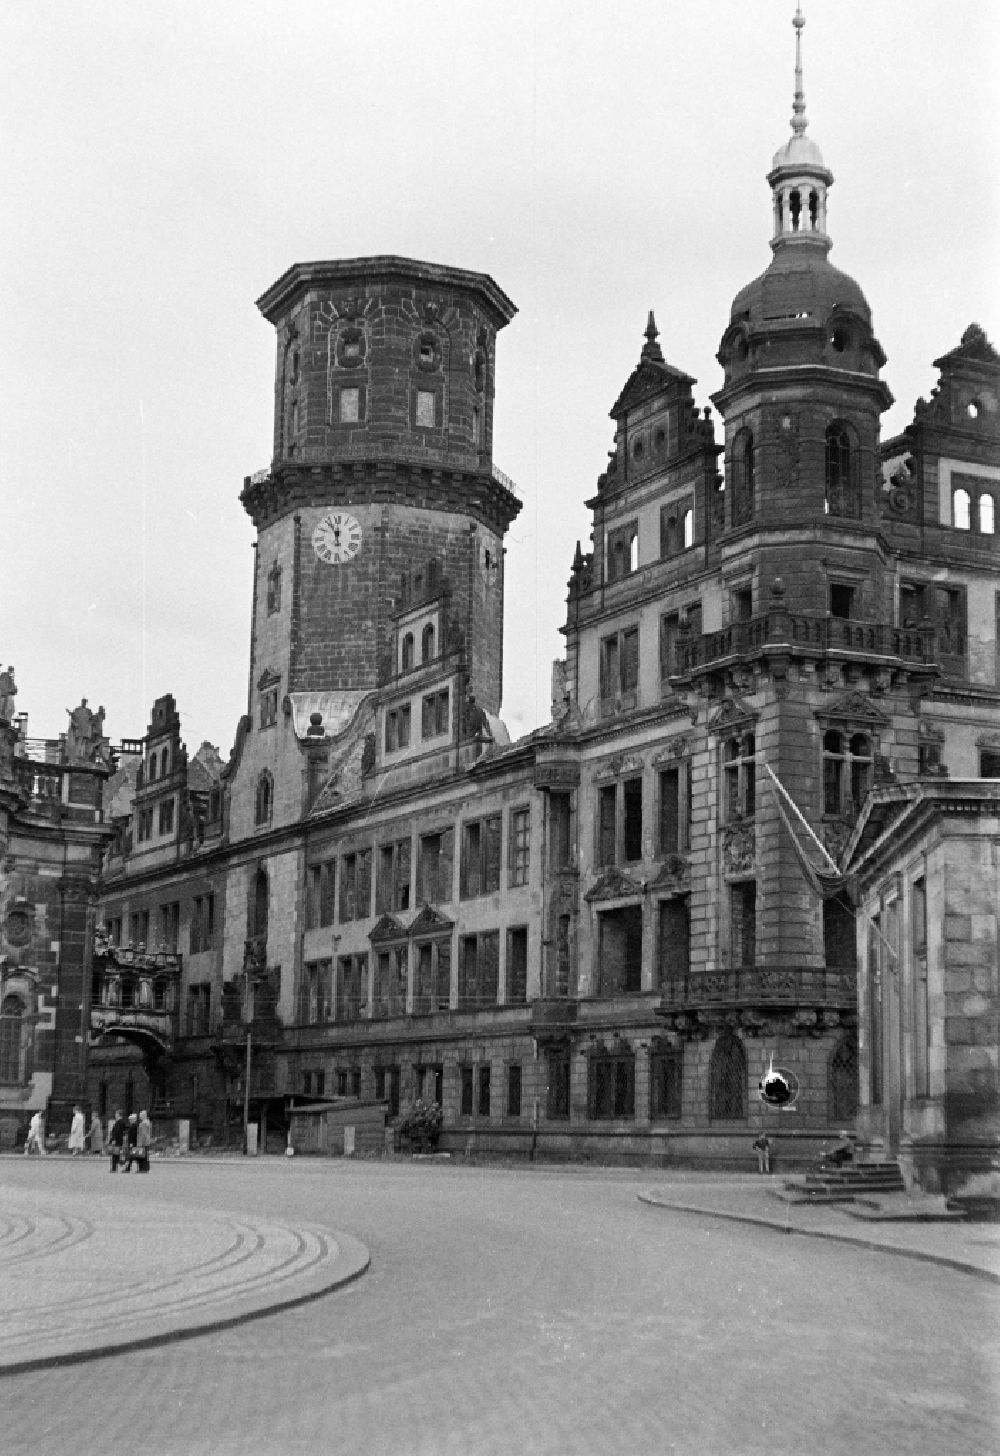 GDR photo archive: Dresden - Ruins of the rest of the facade and roof structuredes Dresdner Schloss on bridge Augustusbruecke in the district Altstadt in Dresden, Saxony on the territory of the former GDR, German Democratic Republic